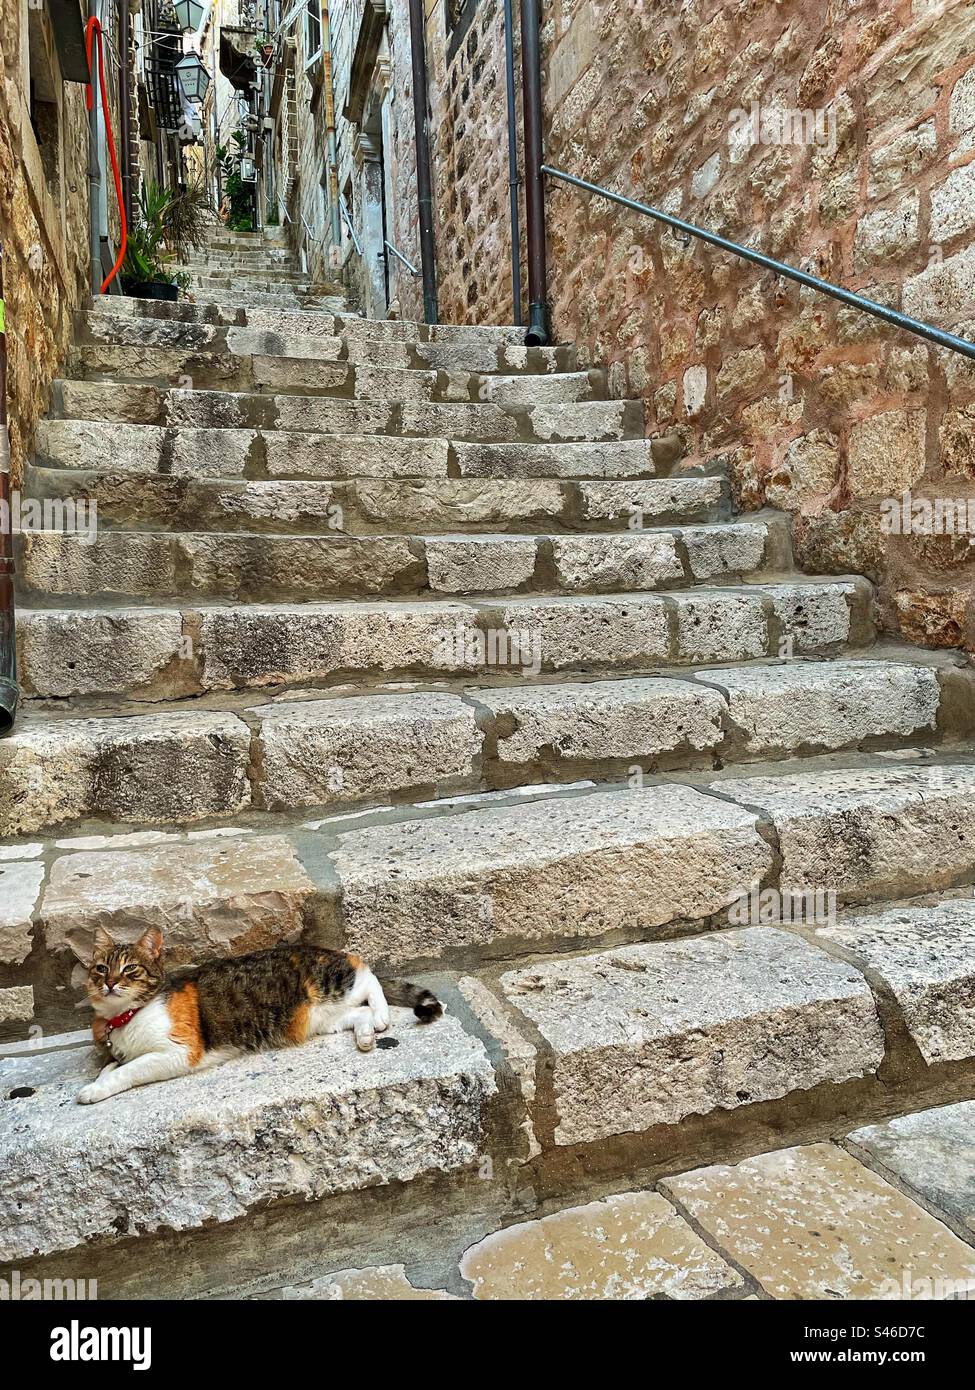 A cat on the steps of a typical steep, narrow Dubrovnik street. Stock Photo